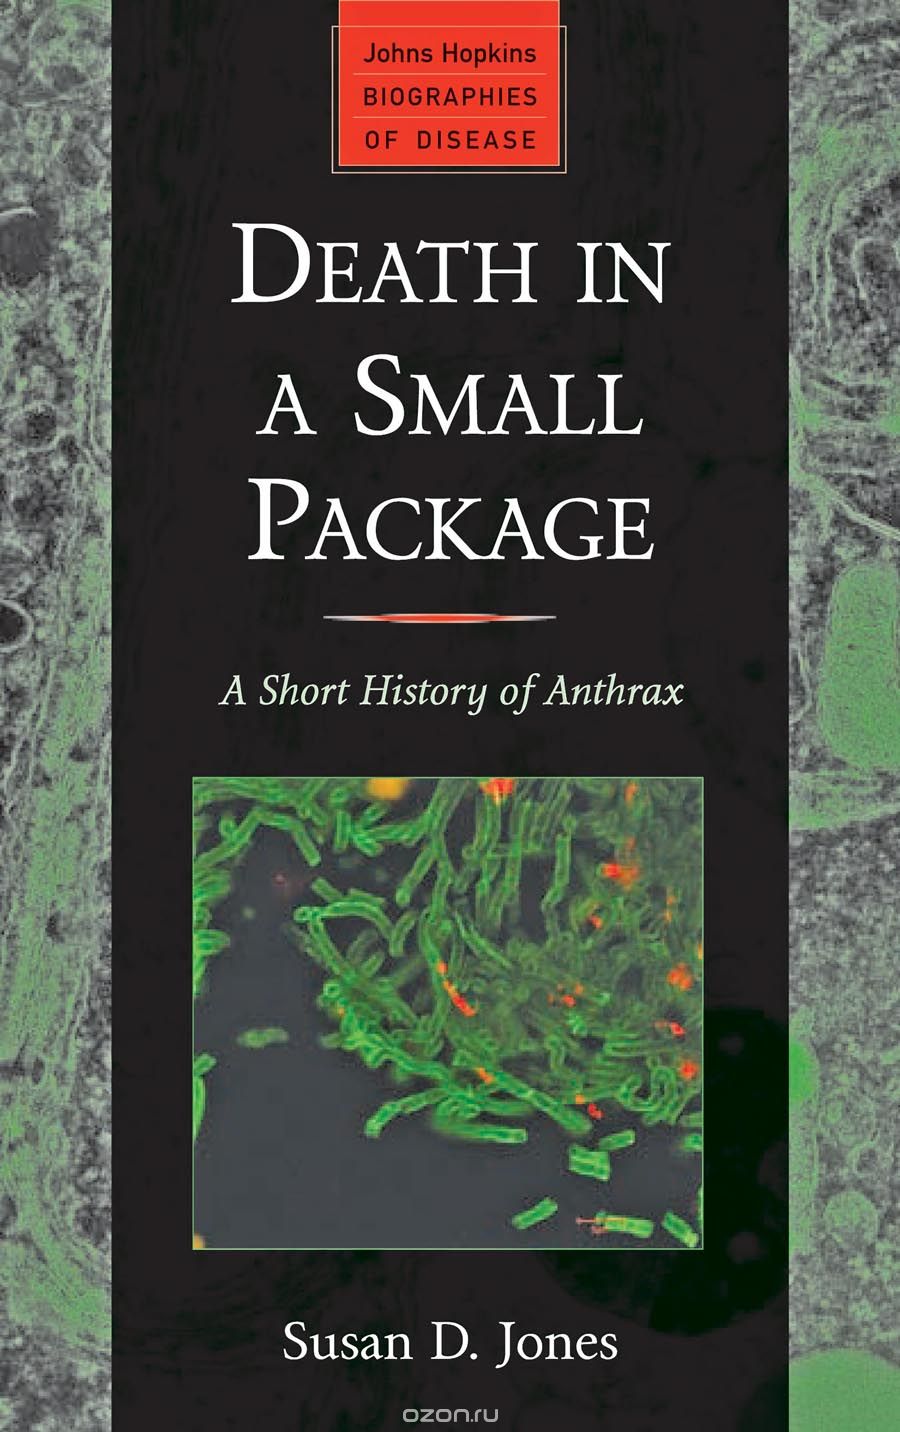 Скачать книгу "Death in a Small Package – A Short History of Anthrax"